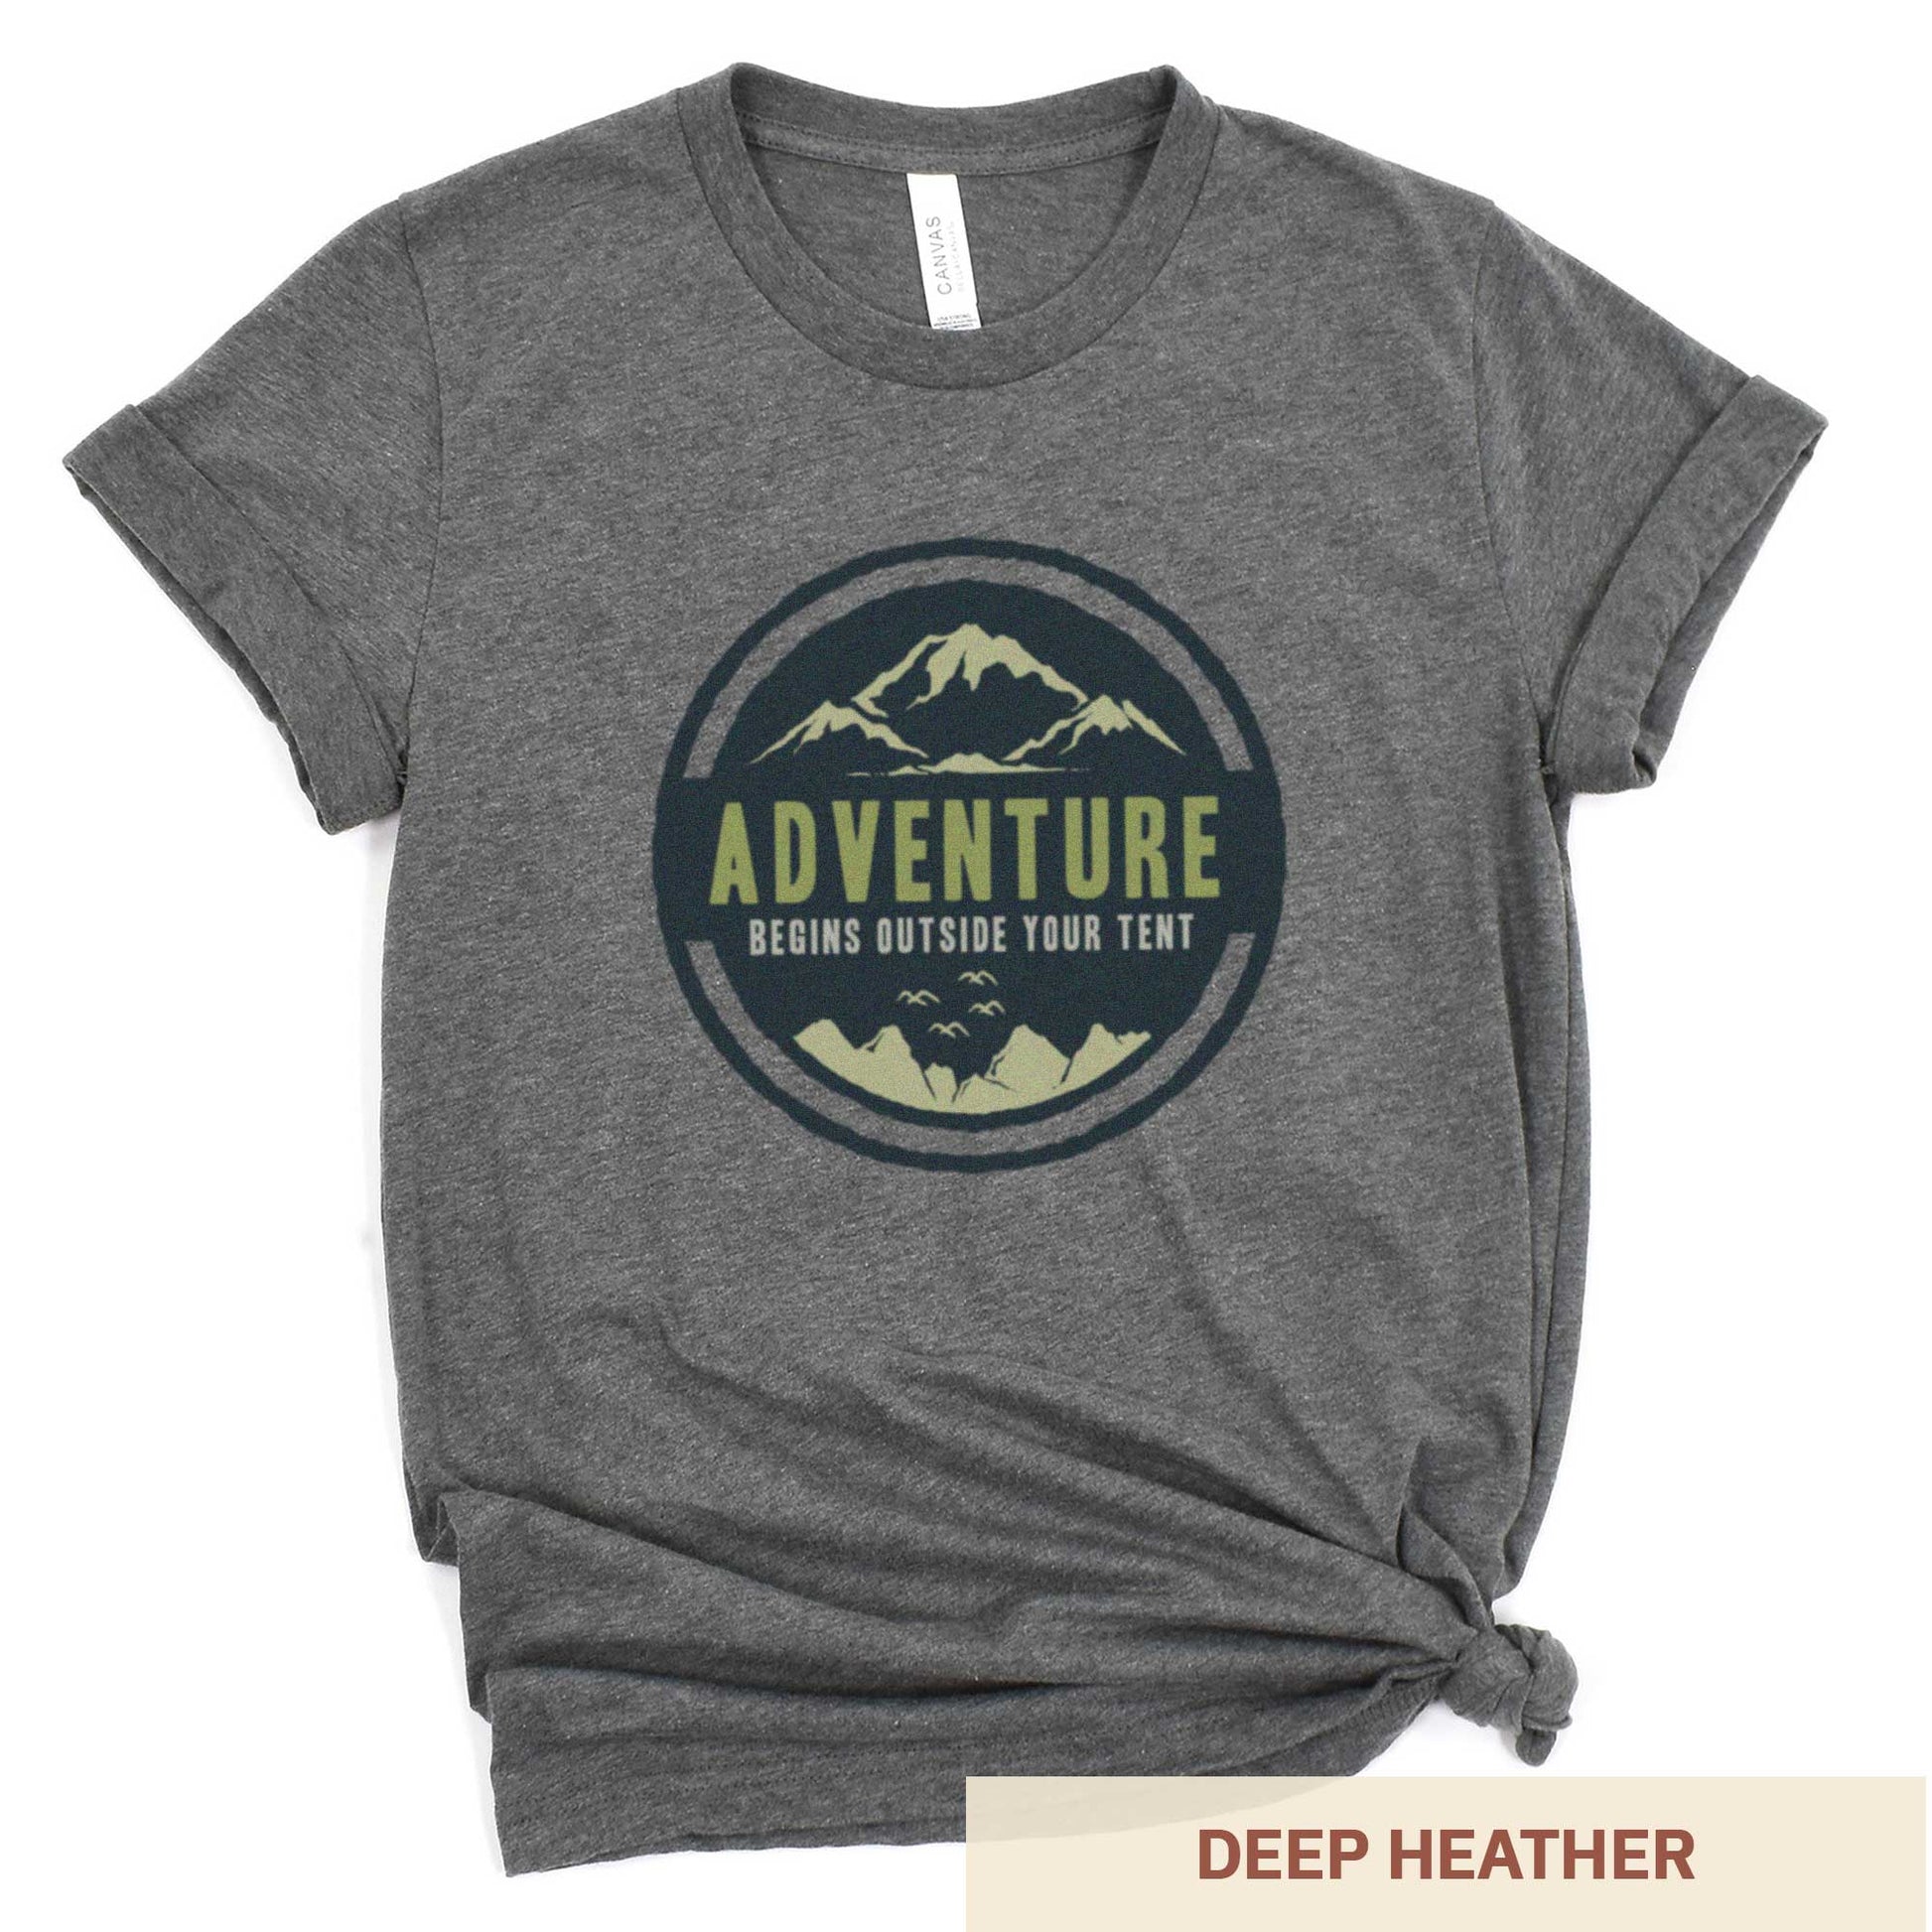 A deep heather Bella Canvas t-shirt that says adventure begins outside your tent.